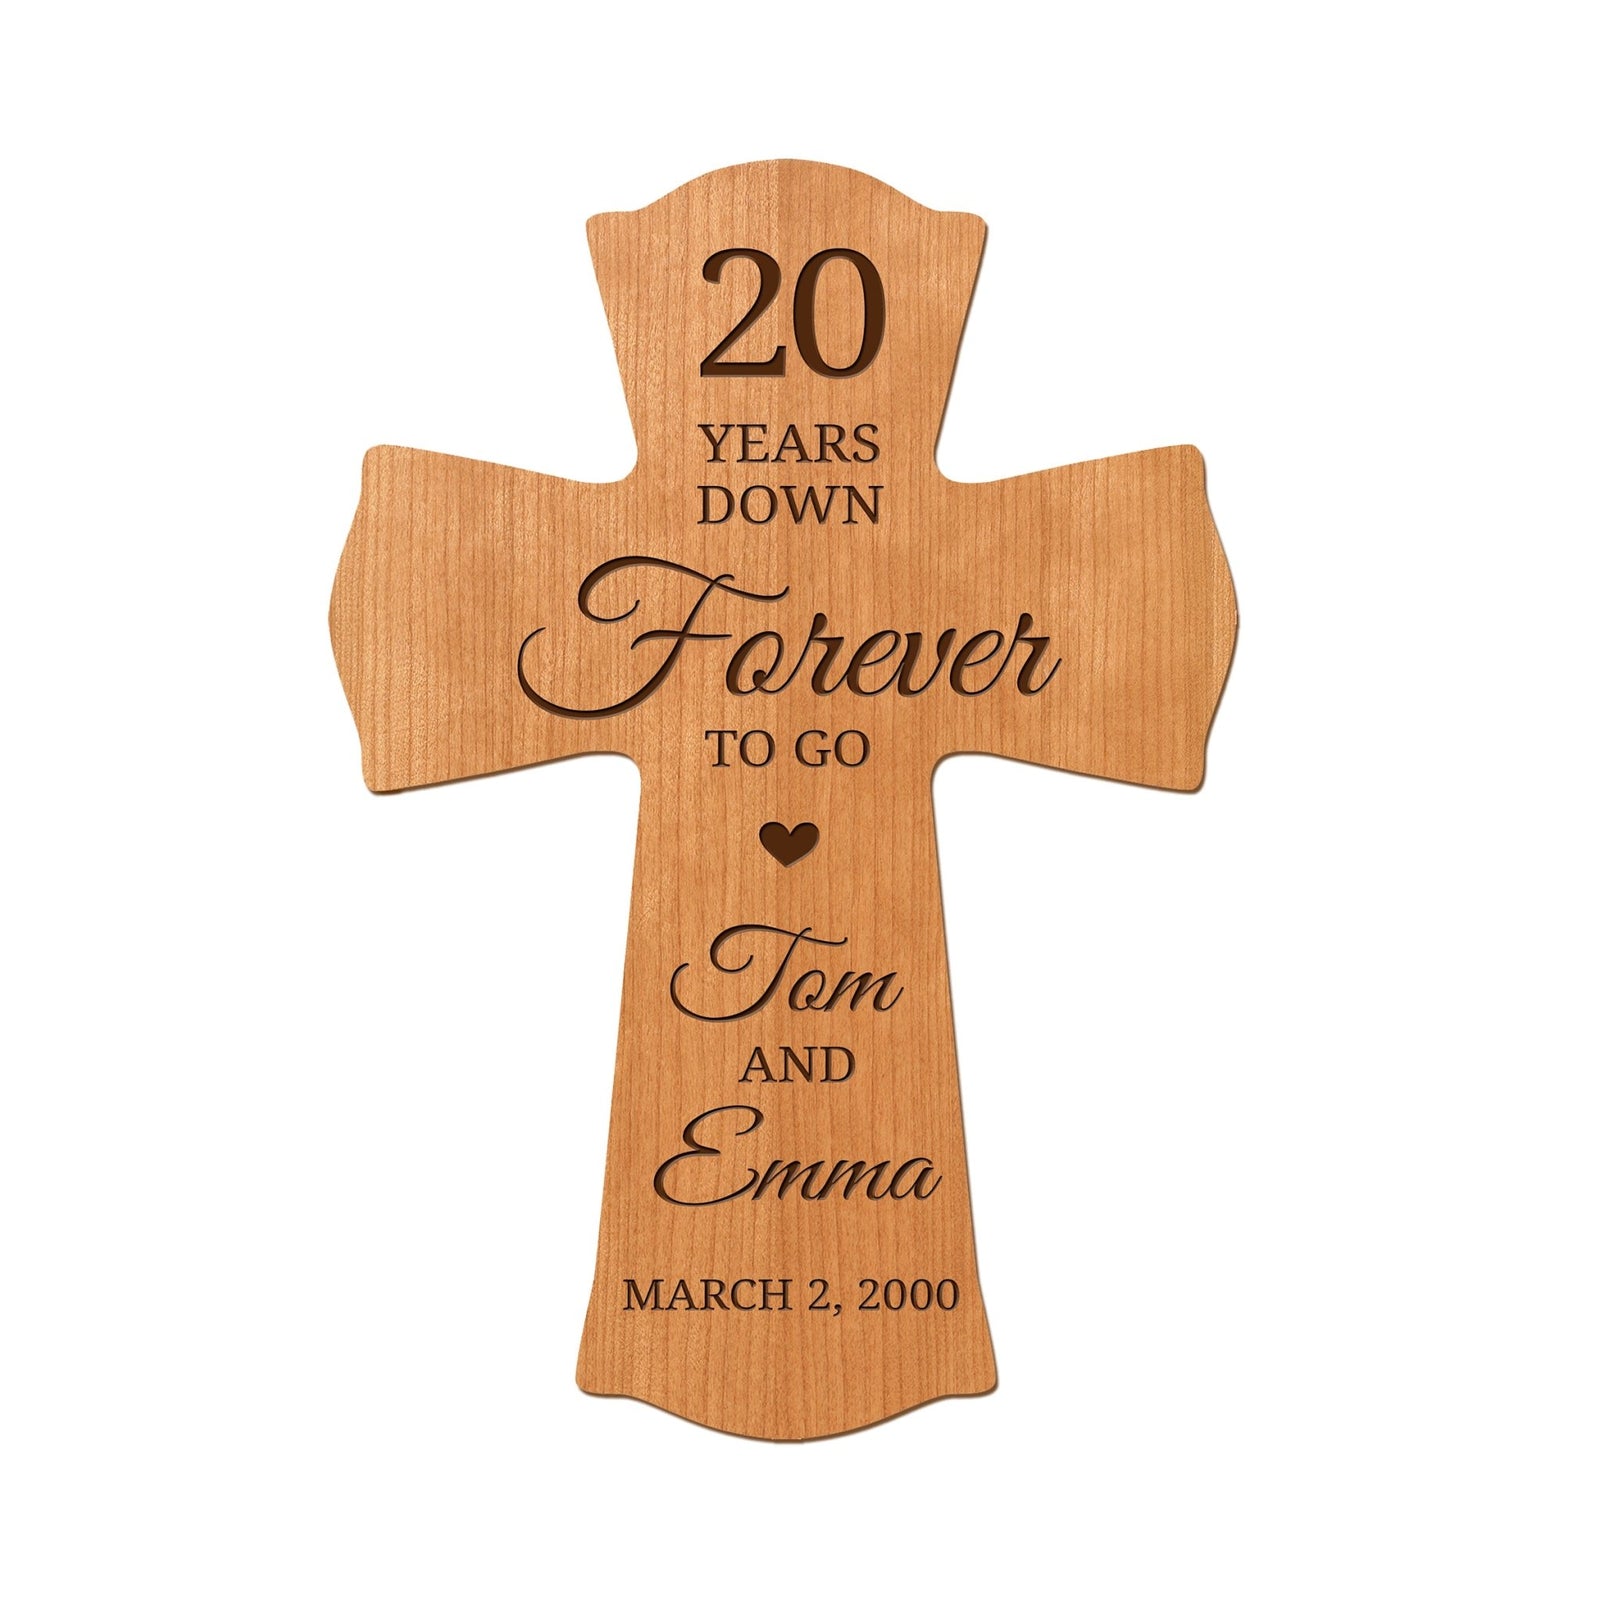 Lifesong Milestones Elegant Personalized Wall Cross - Perfect for 20th Wedding Anniversary